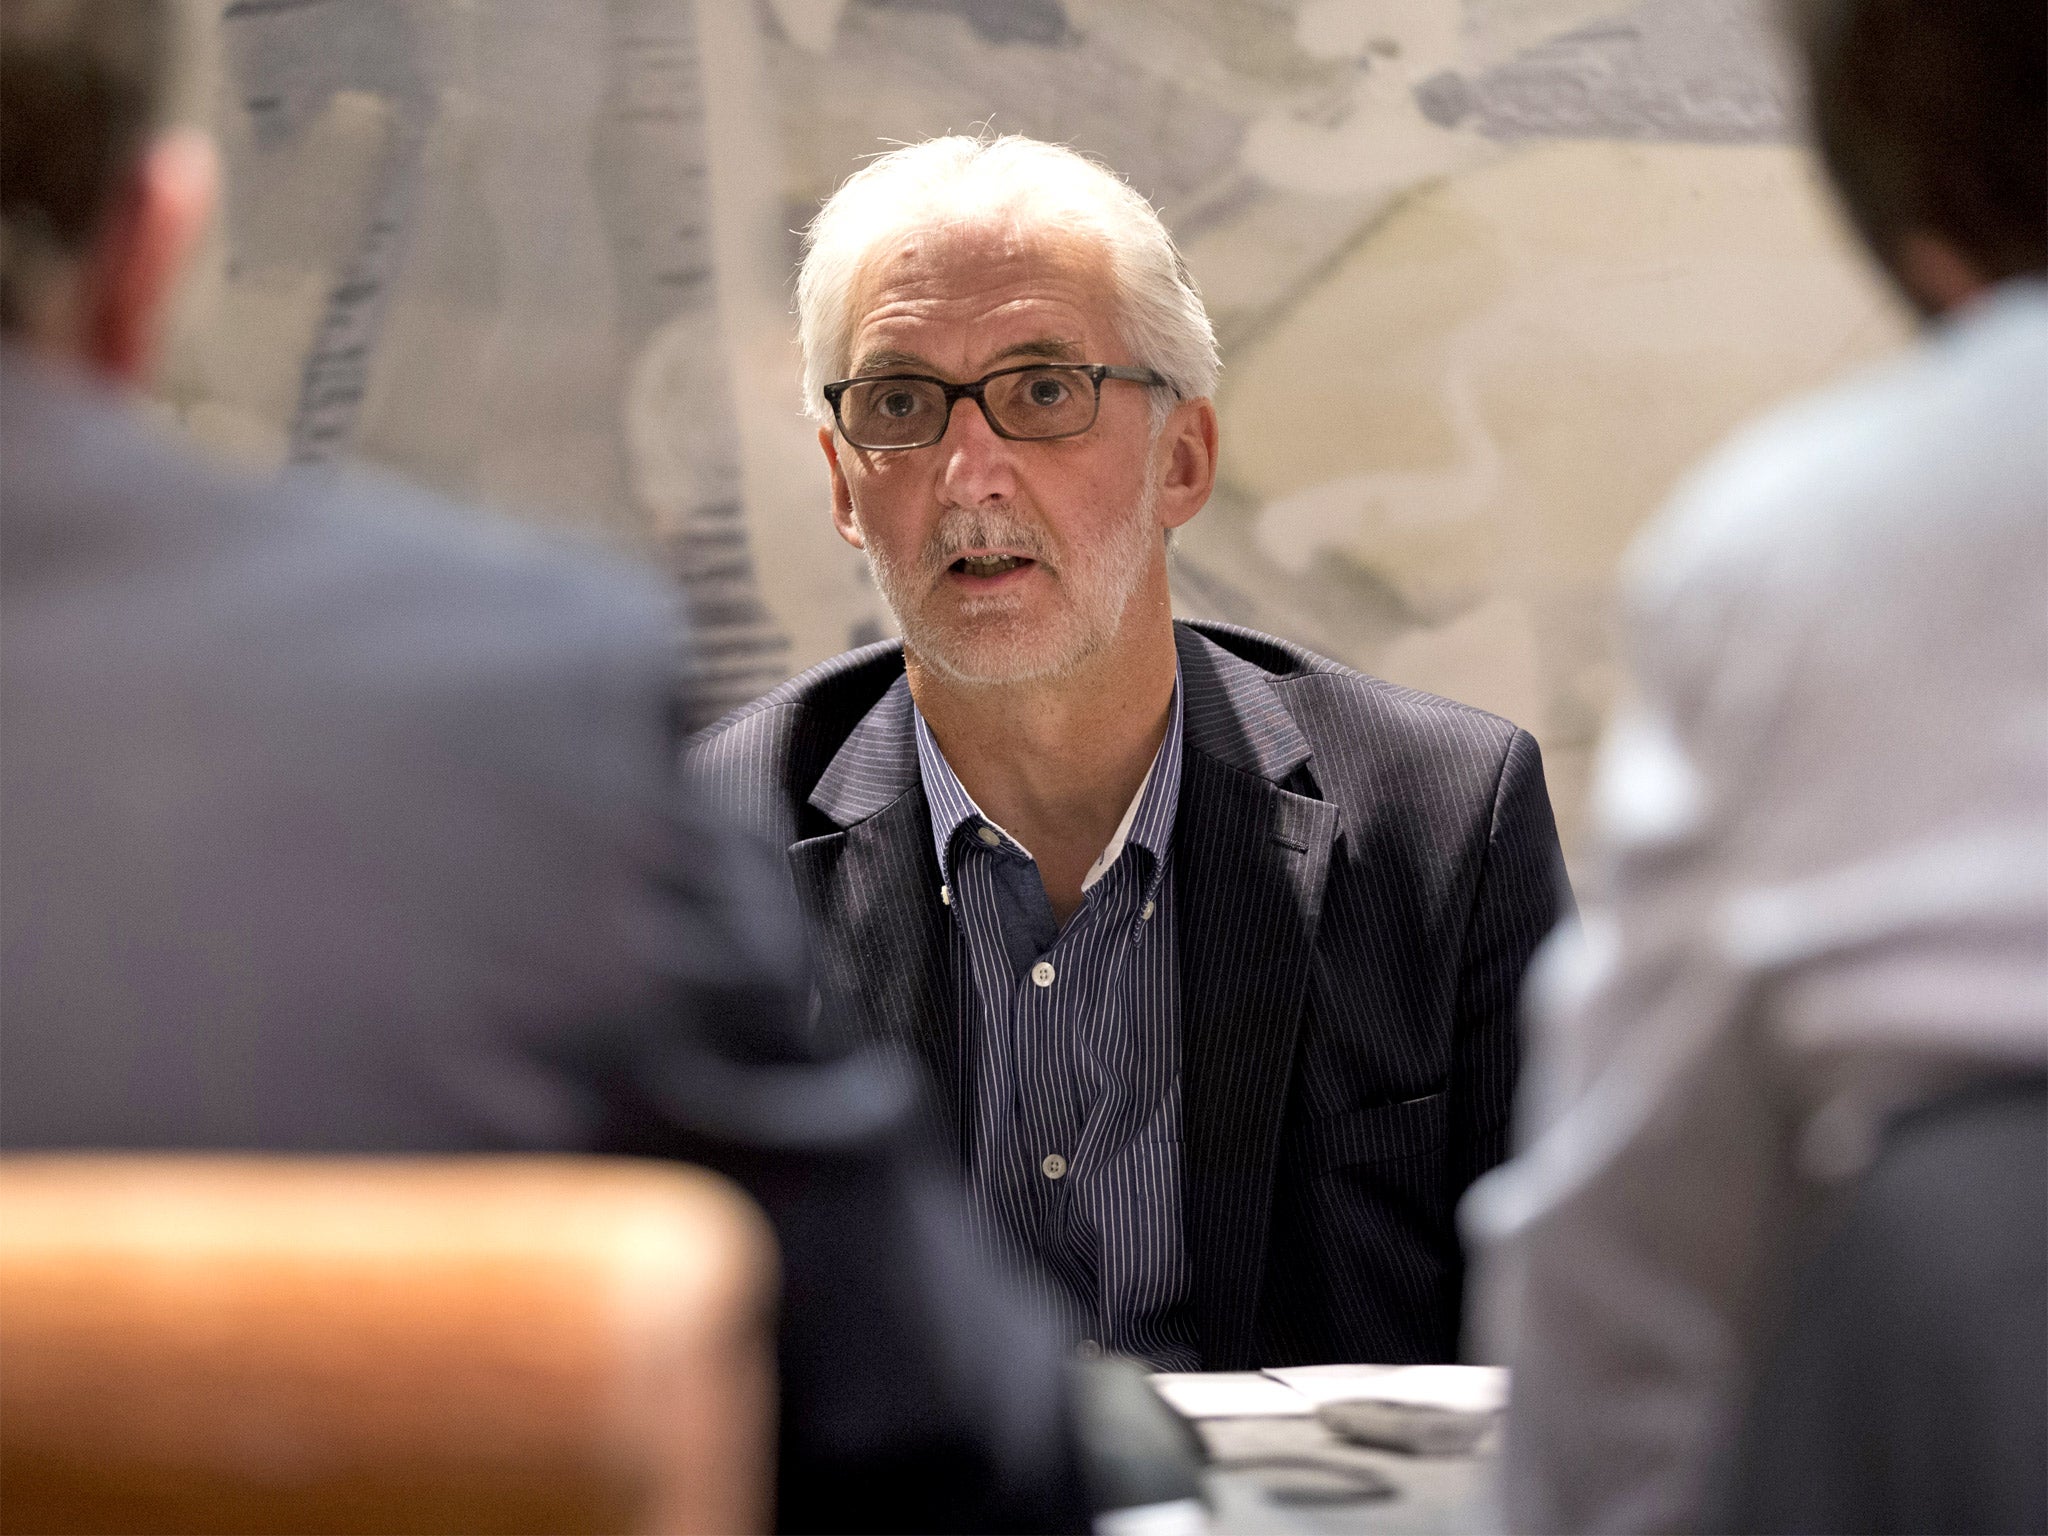 Brian Cookson has promised, if elected, to tackle doping in cycling 'without fear or favour'